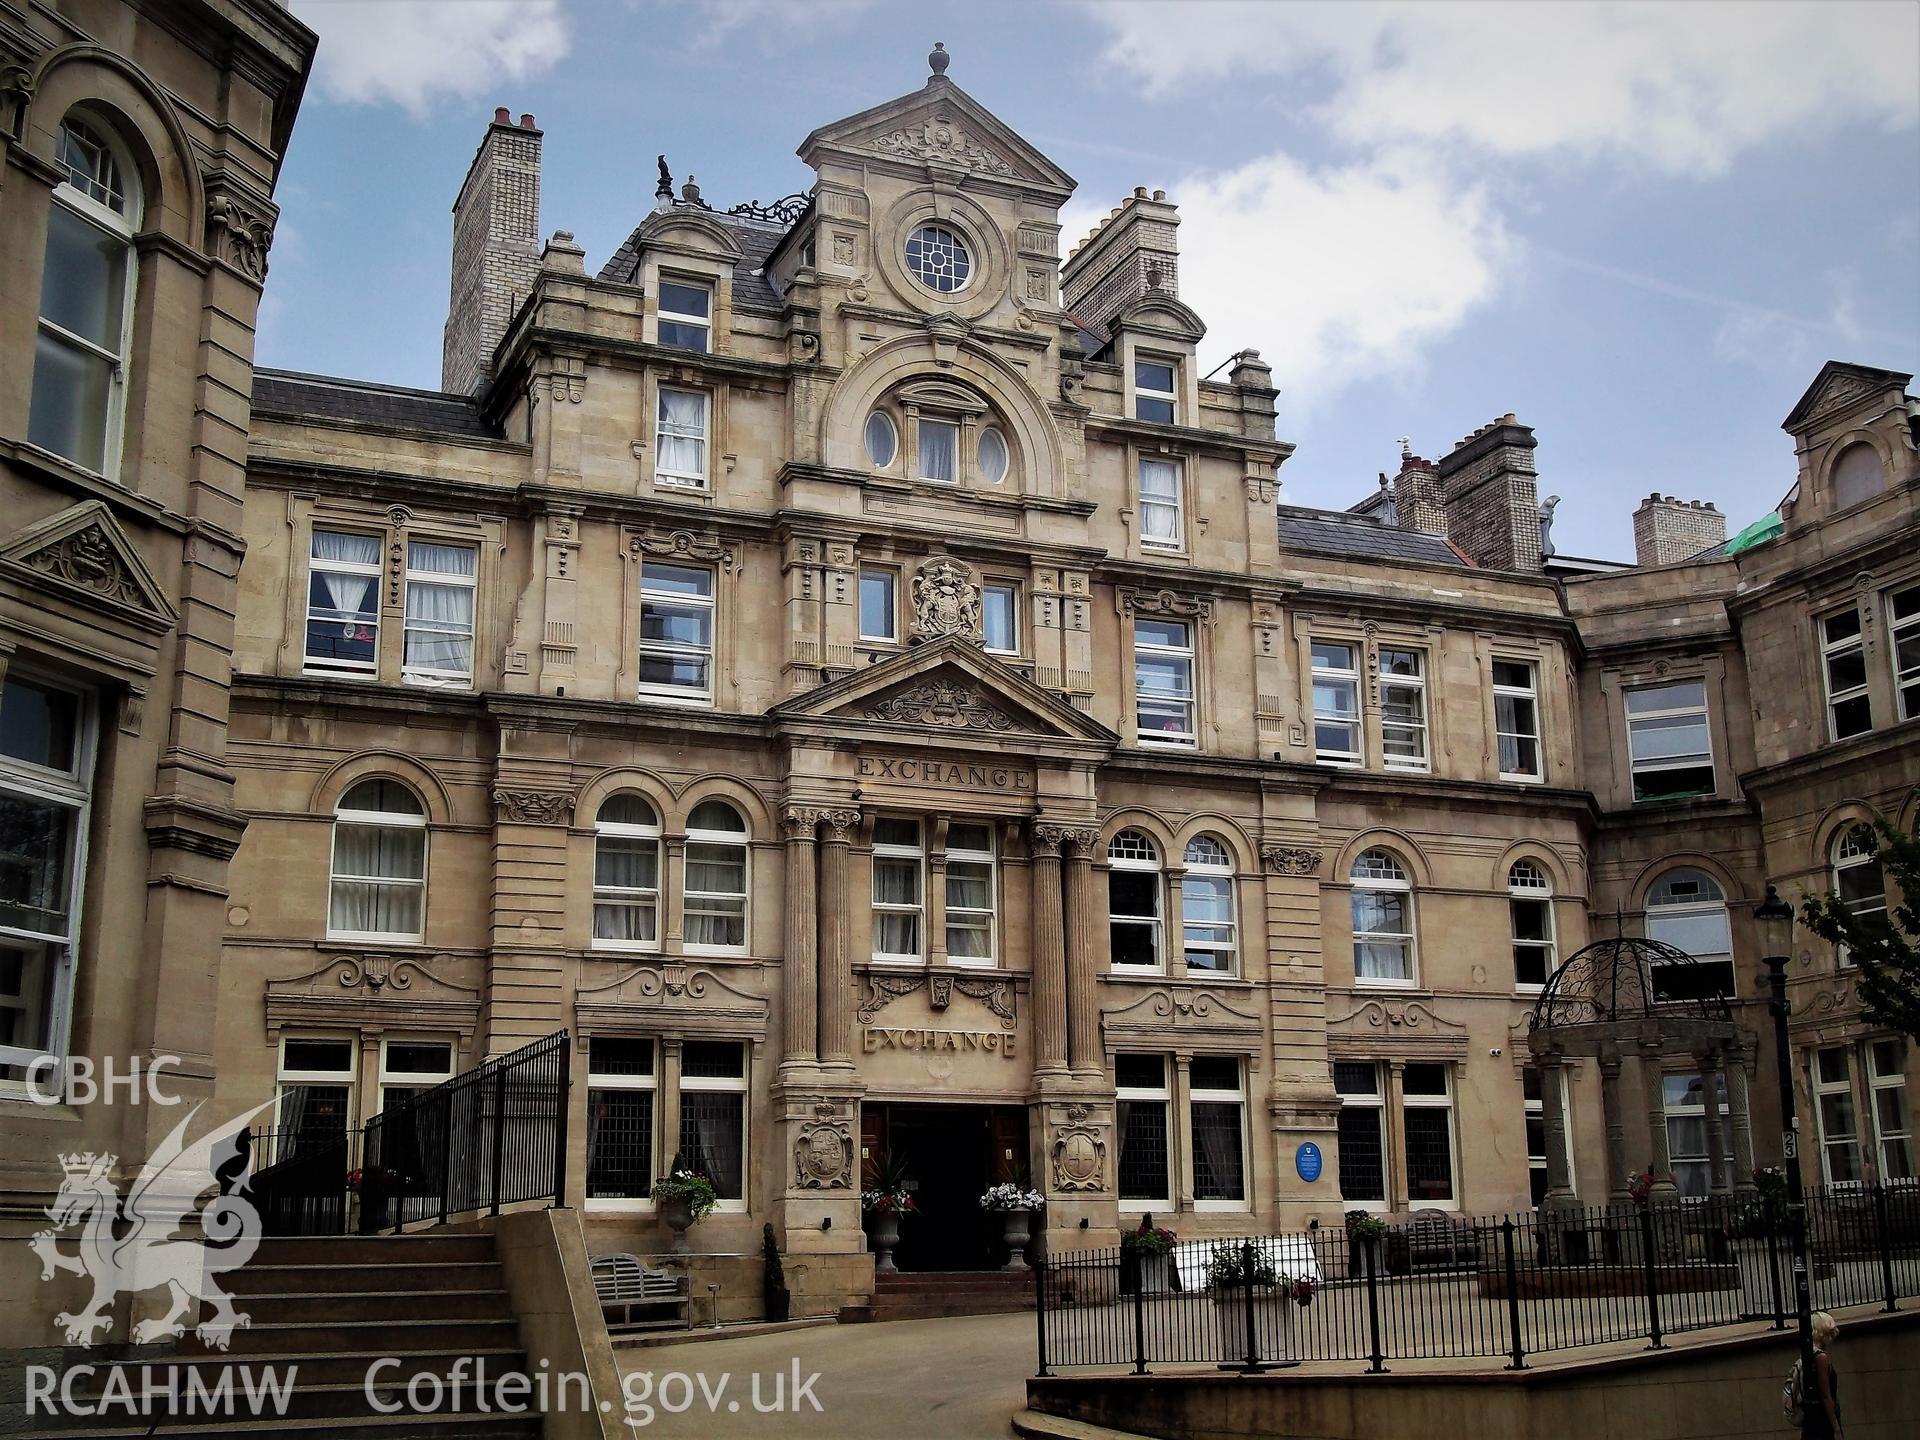 Colour photograph showing exterior of the old coal exchange (now the Exchange Hotel), Mount Stuart Square, Butetown, taken by Adam Coward on 10th July 2018.